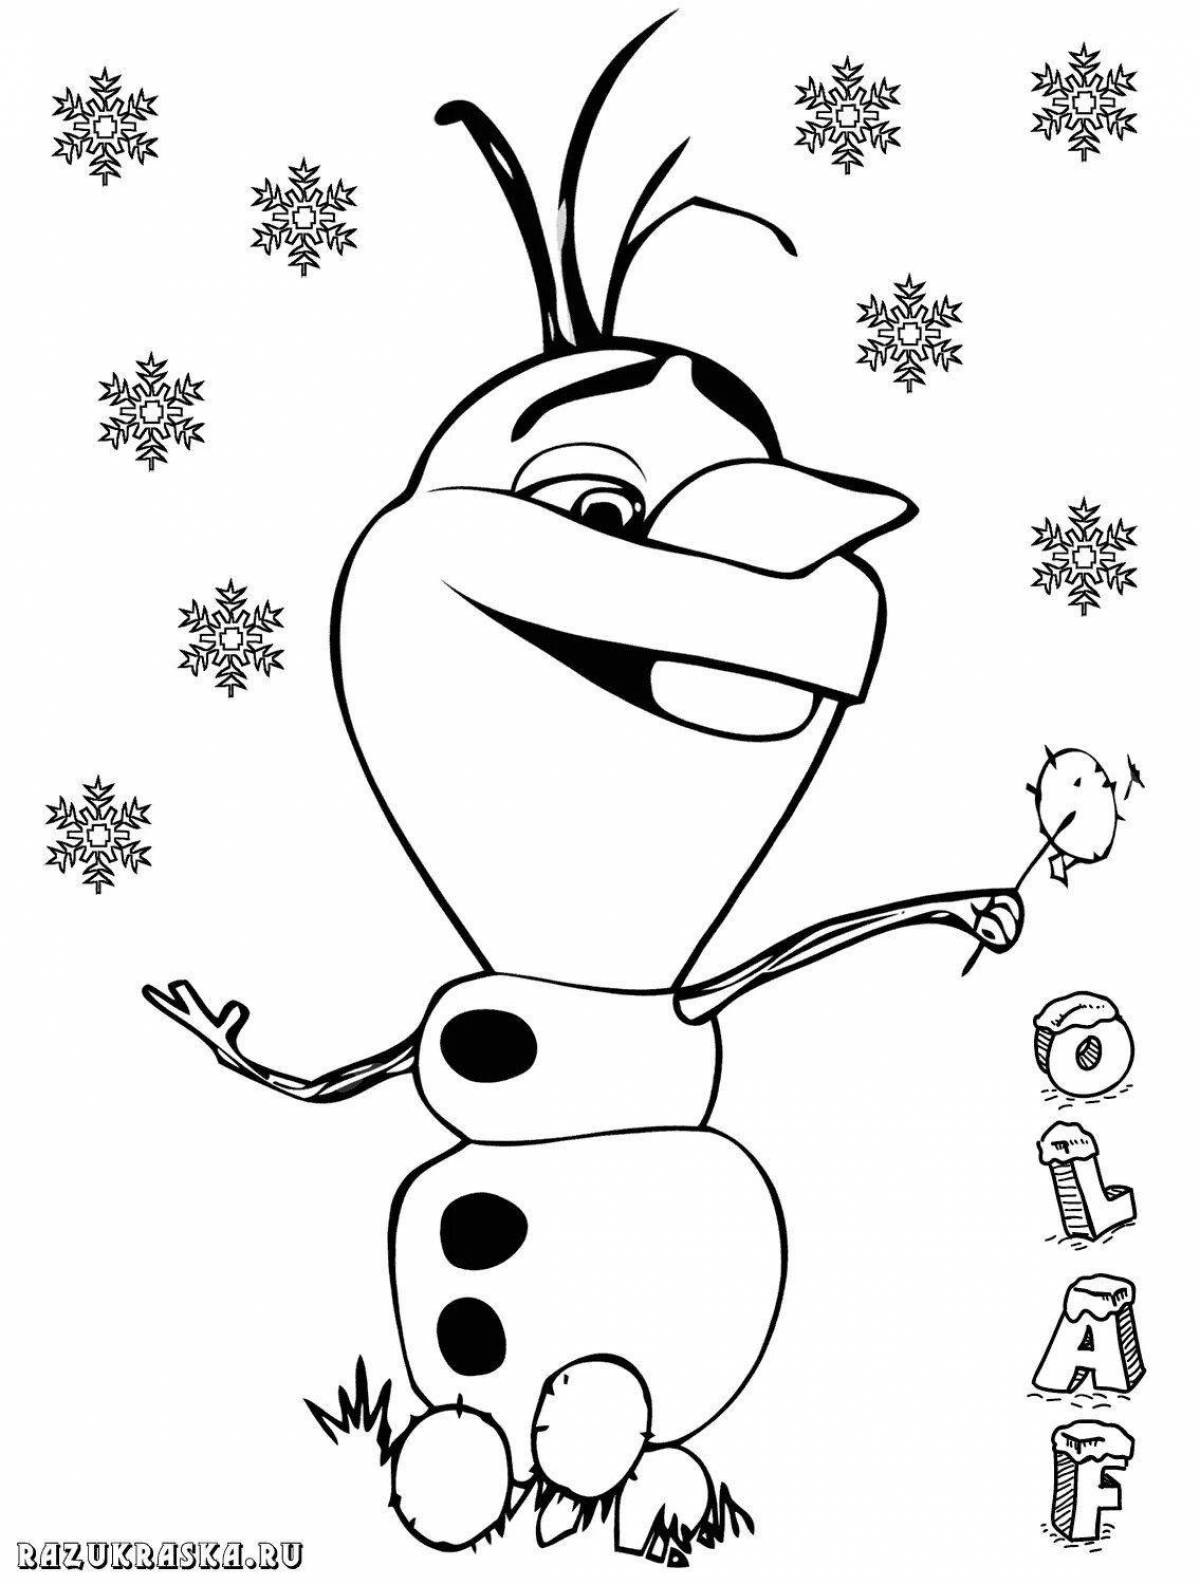 Zani Olaf the snowman coloring page